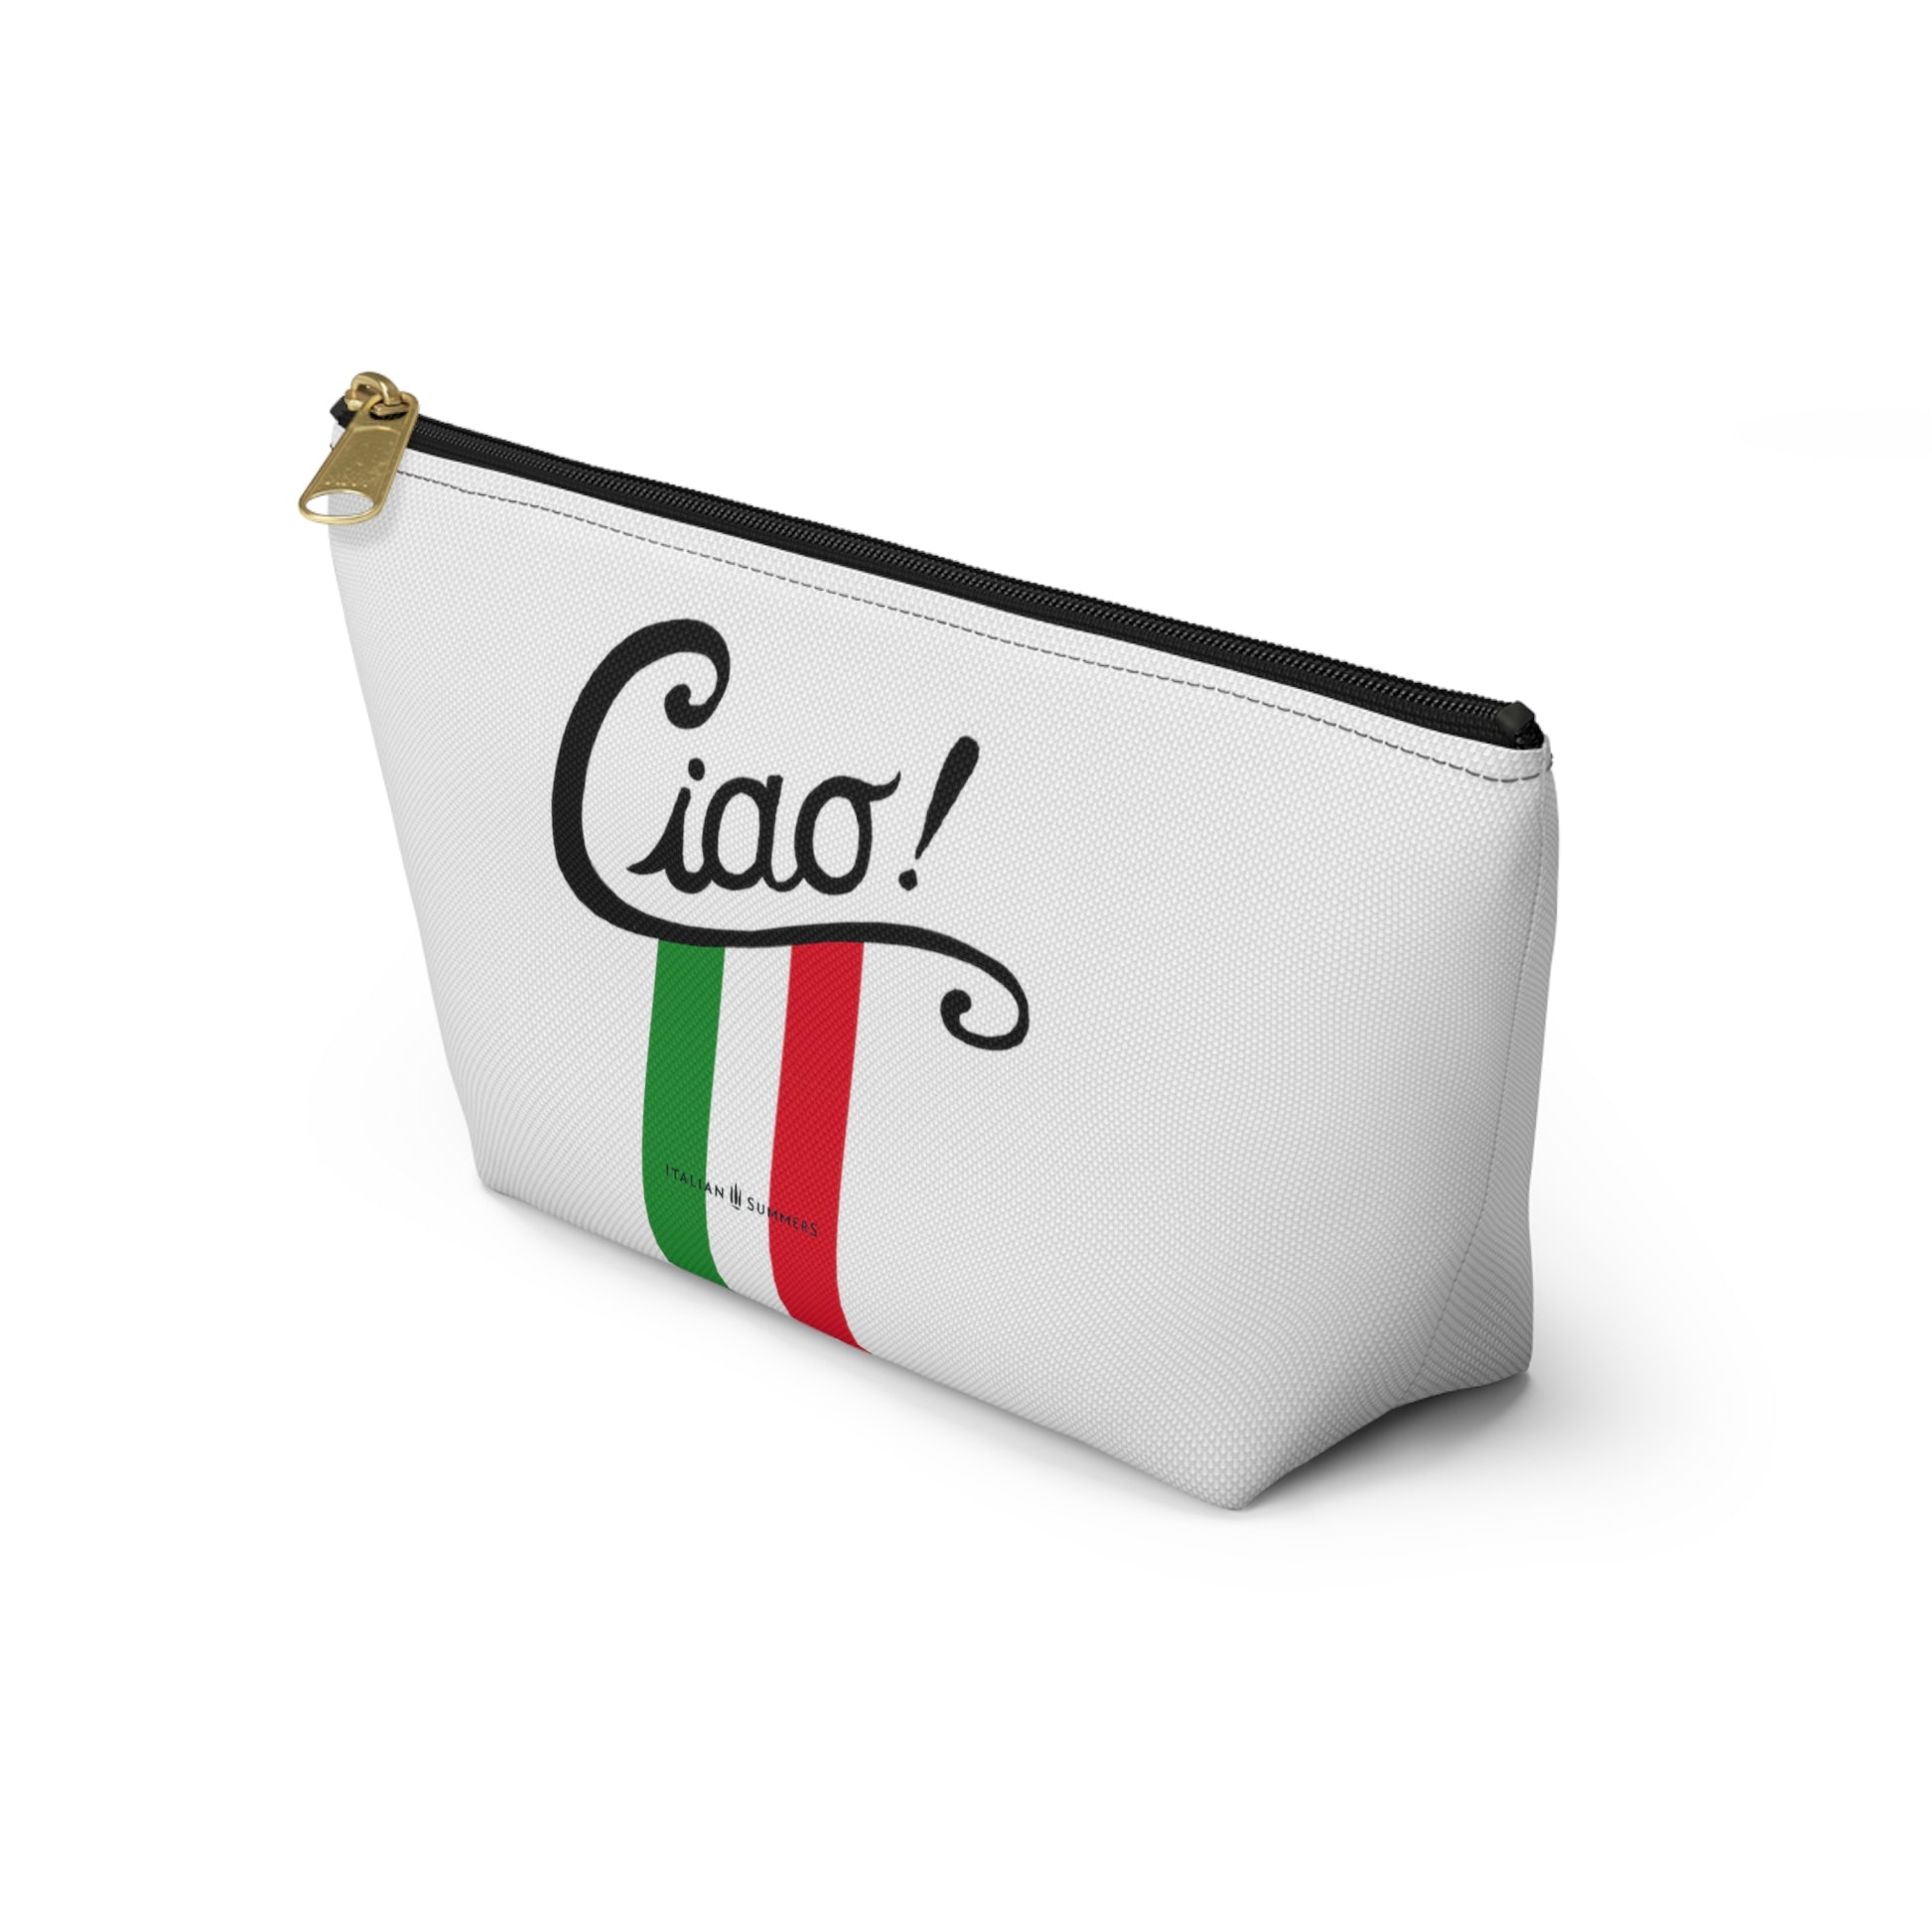 The Clutch CIAO ITALIA is a fun and stylish way to add a dash of Italian charm to any look! Crafted with vibrant stripes in the colors of the Italian flag, it's sure to spread some amore everywhere you go! And with the word "Ciao!" across the front